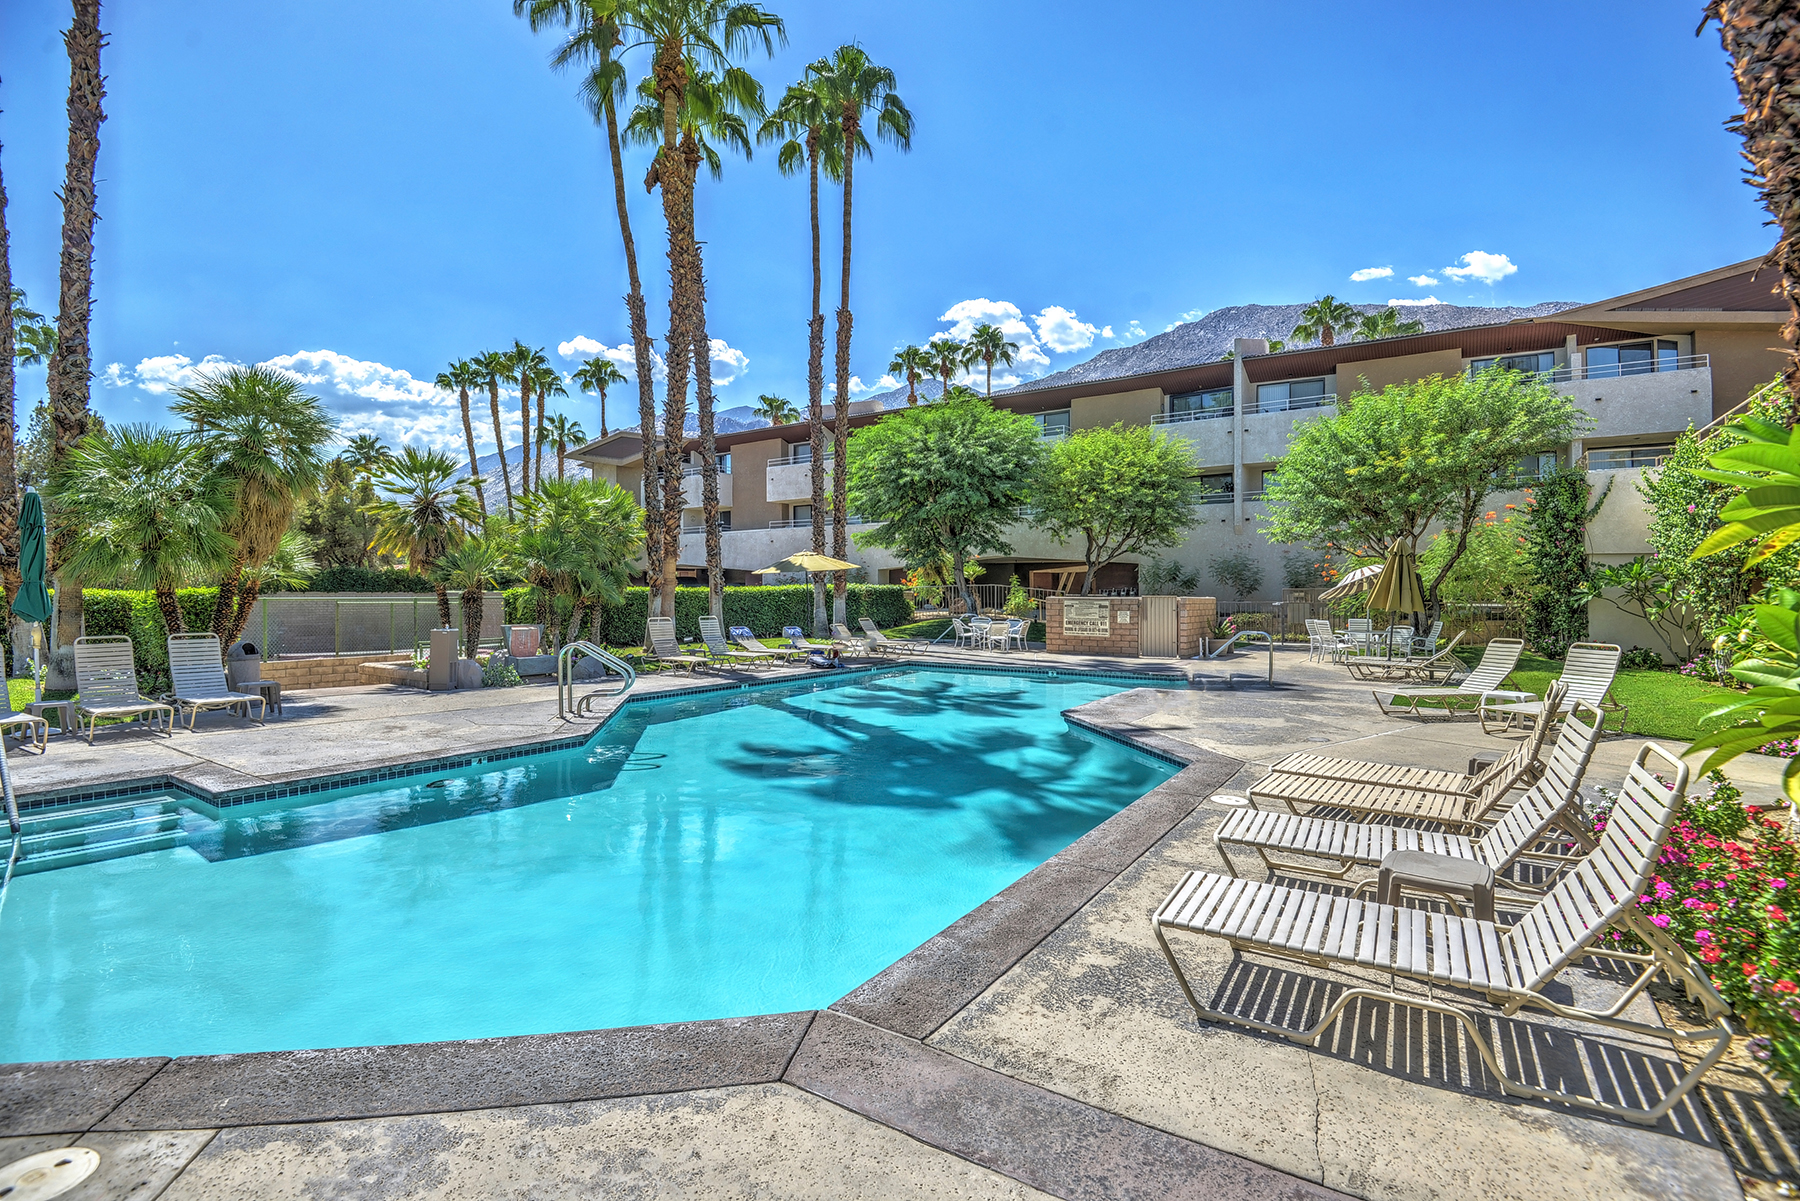 Biarritz Bliss - Downtown Palm Springs  -COMMUNITY POOL